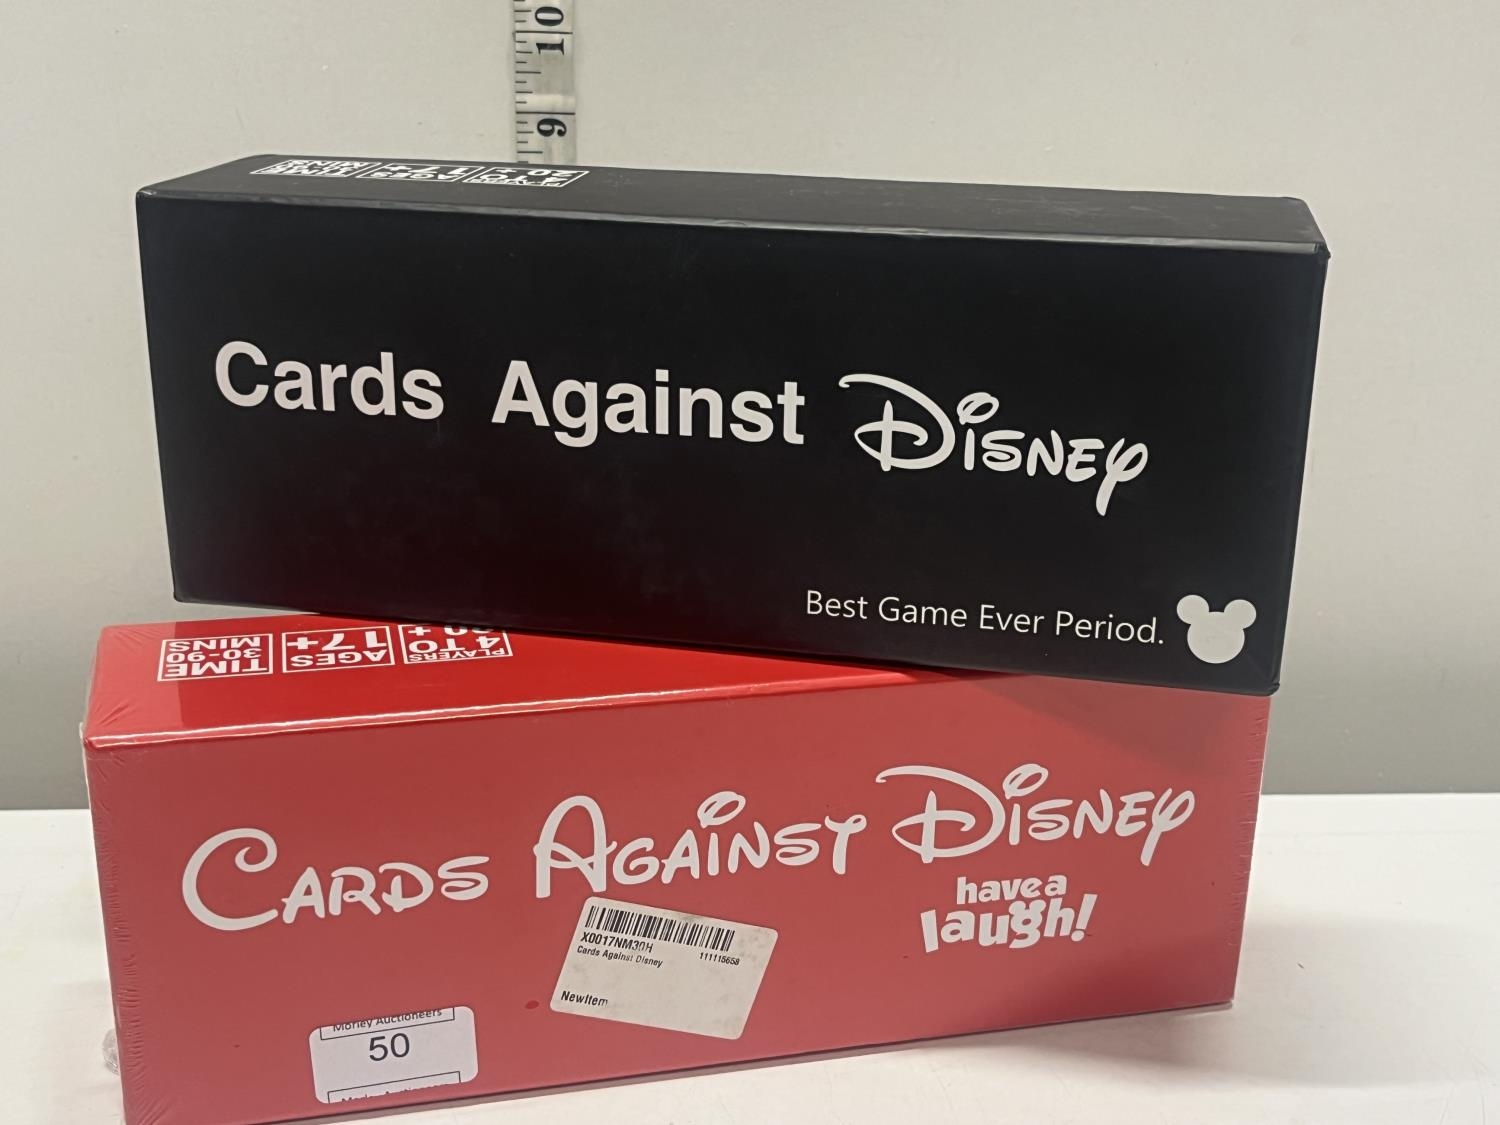 A new sealed box of cards against Disney and one other